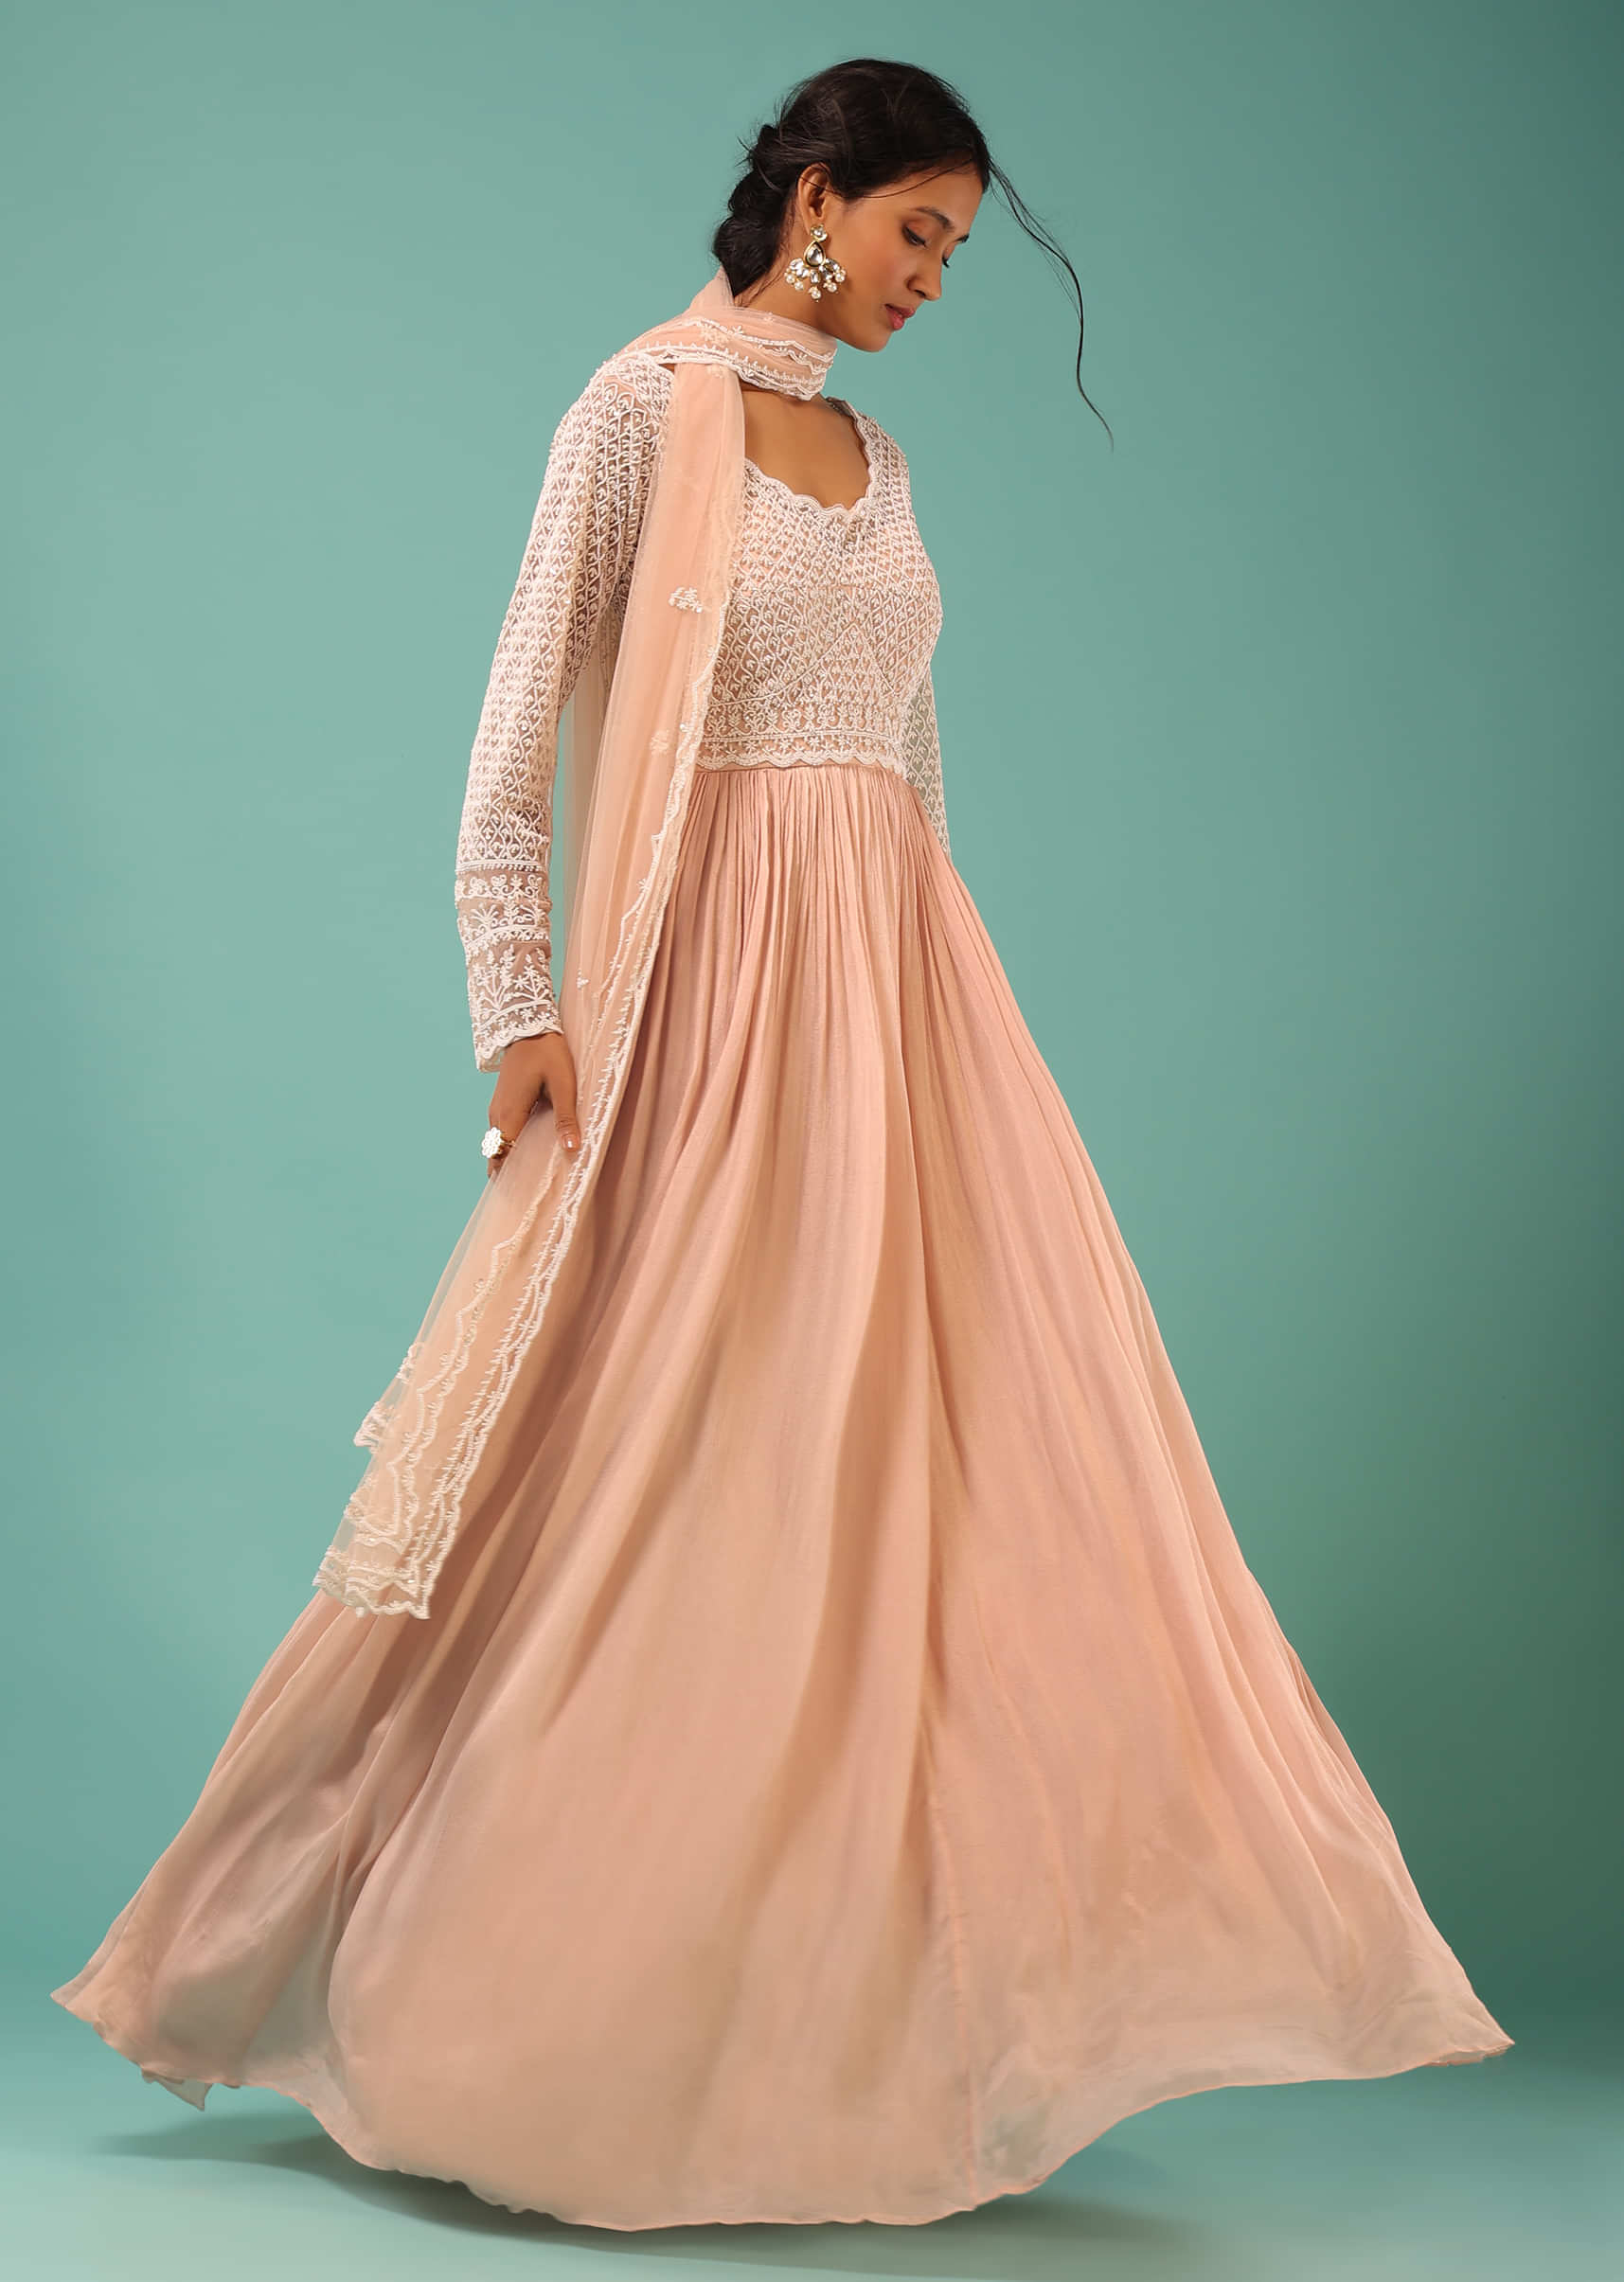 Powder Peach Anarkali Suit In Chiffon With Morroccon Moti Embroidery